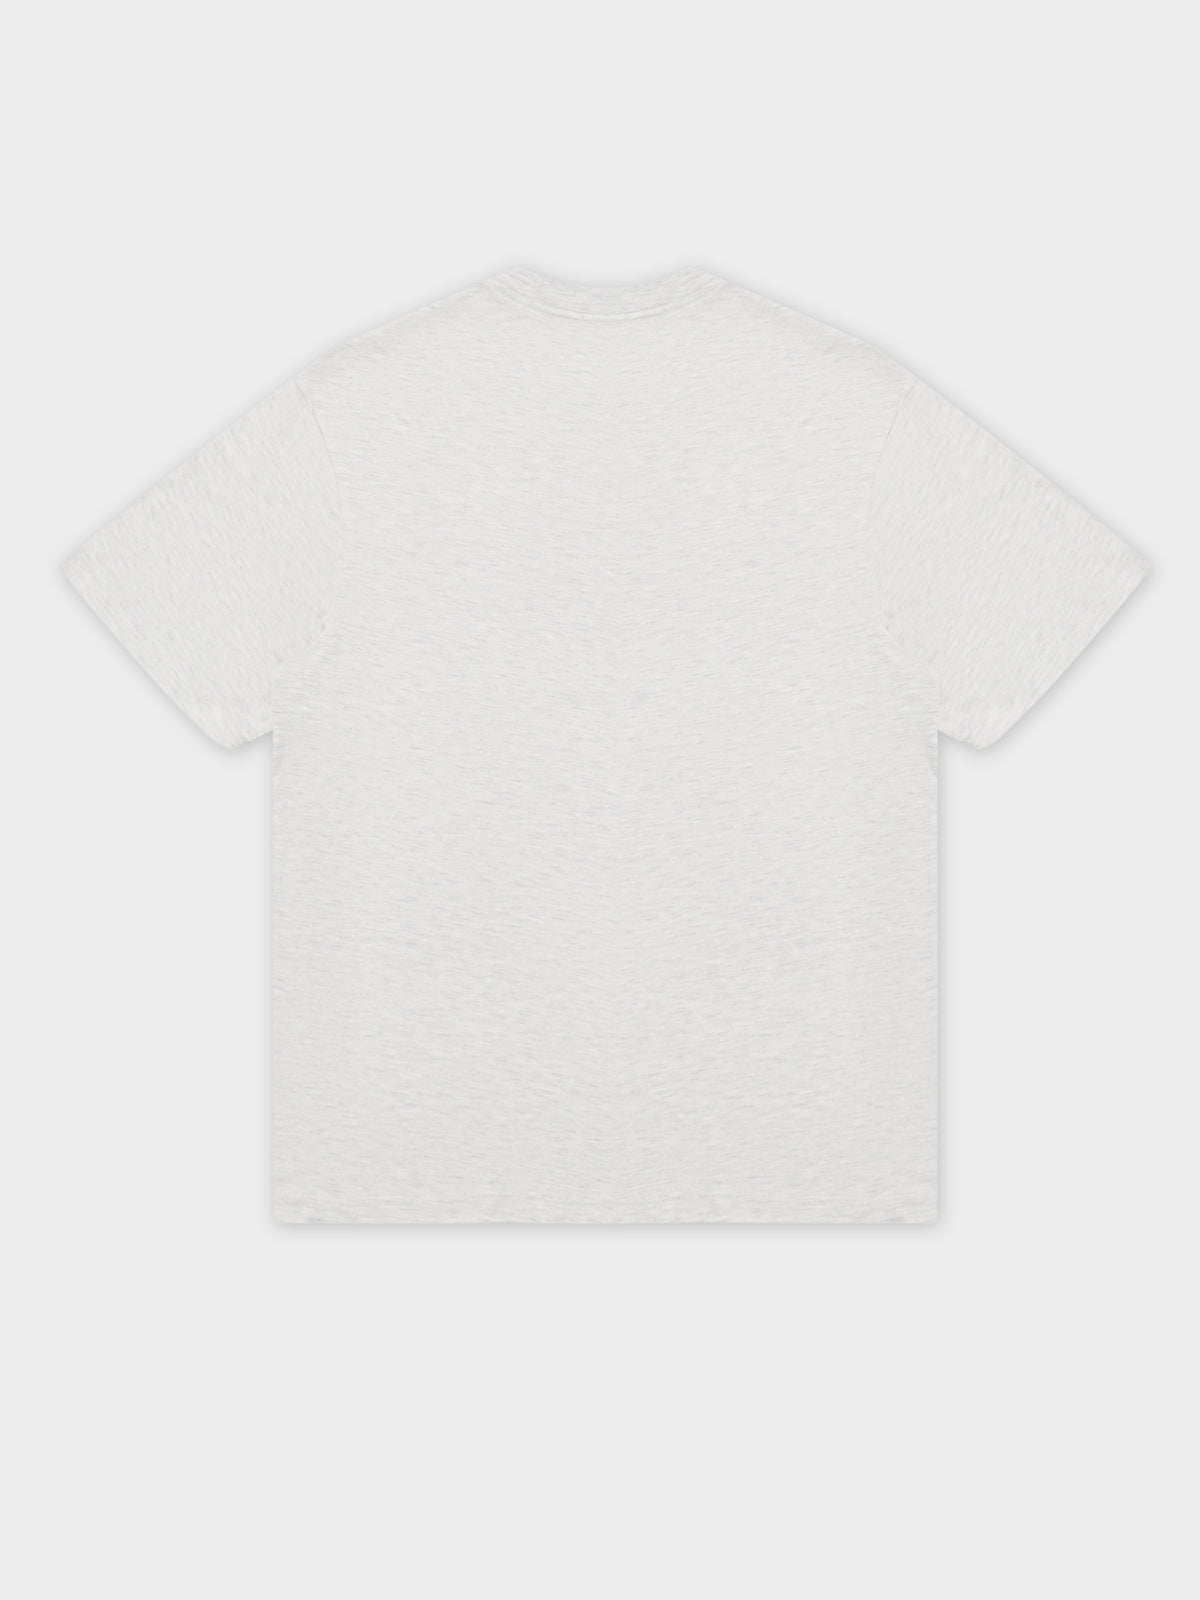 Nothing But Net Suns T-Shirt in Silver